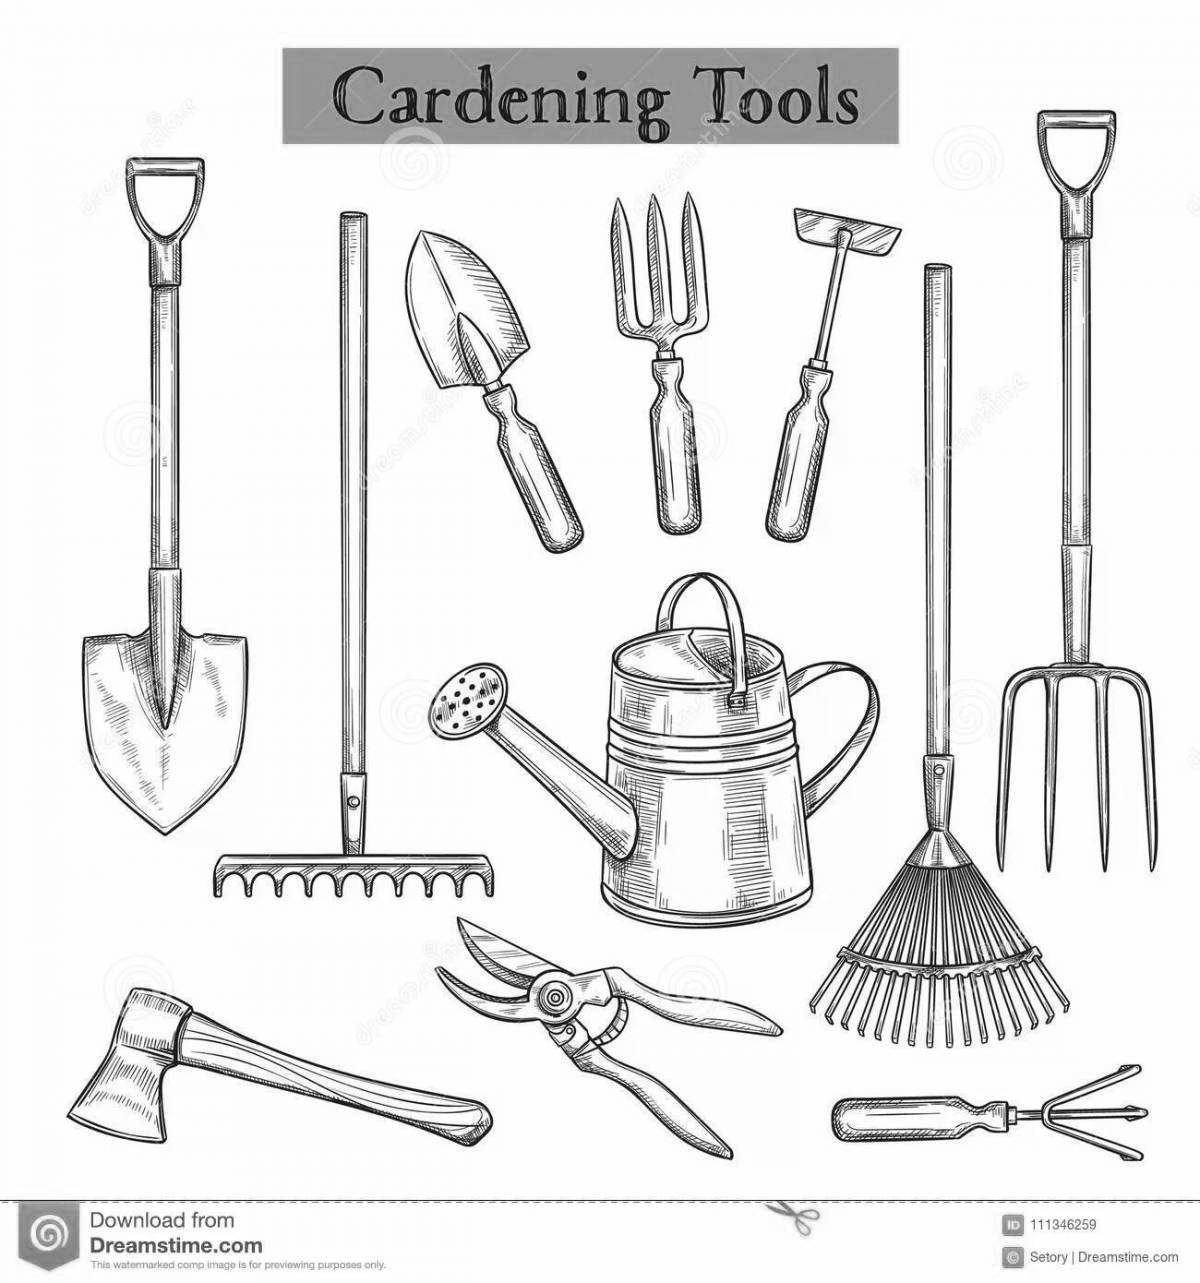 Coloring page of tools with vibrant colors